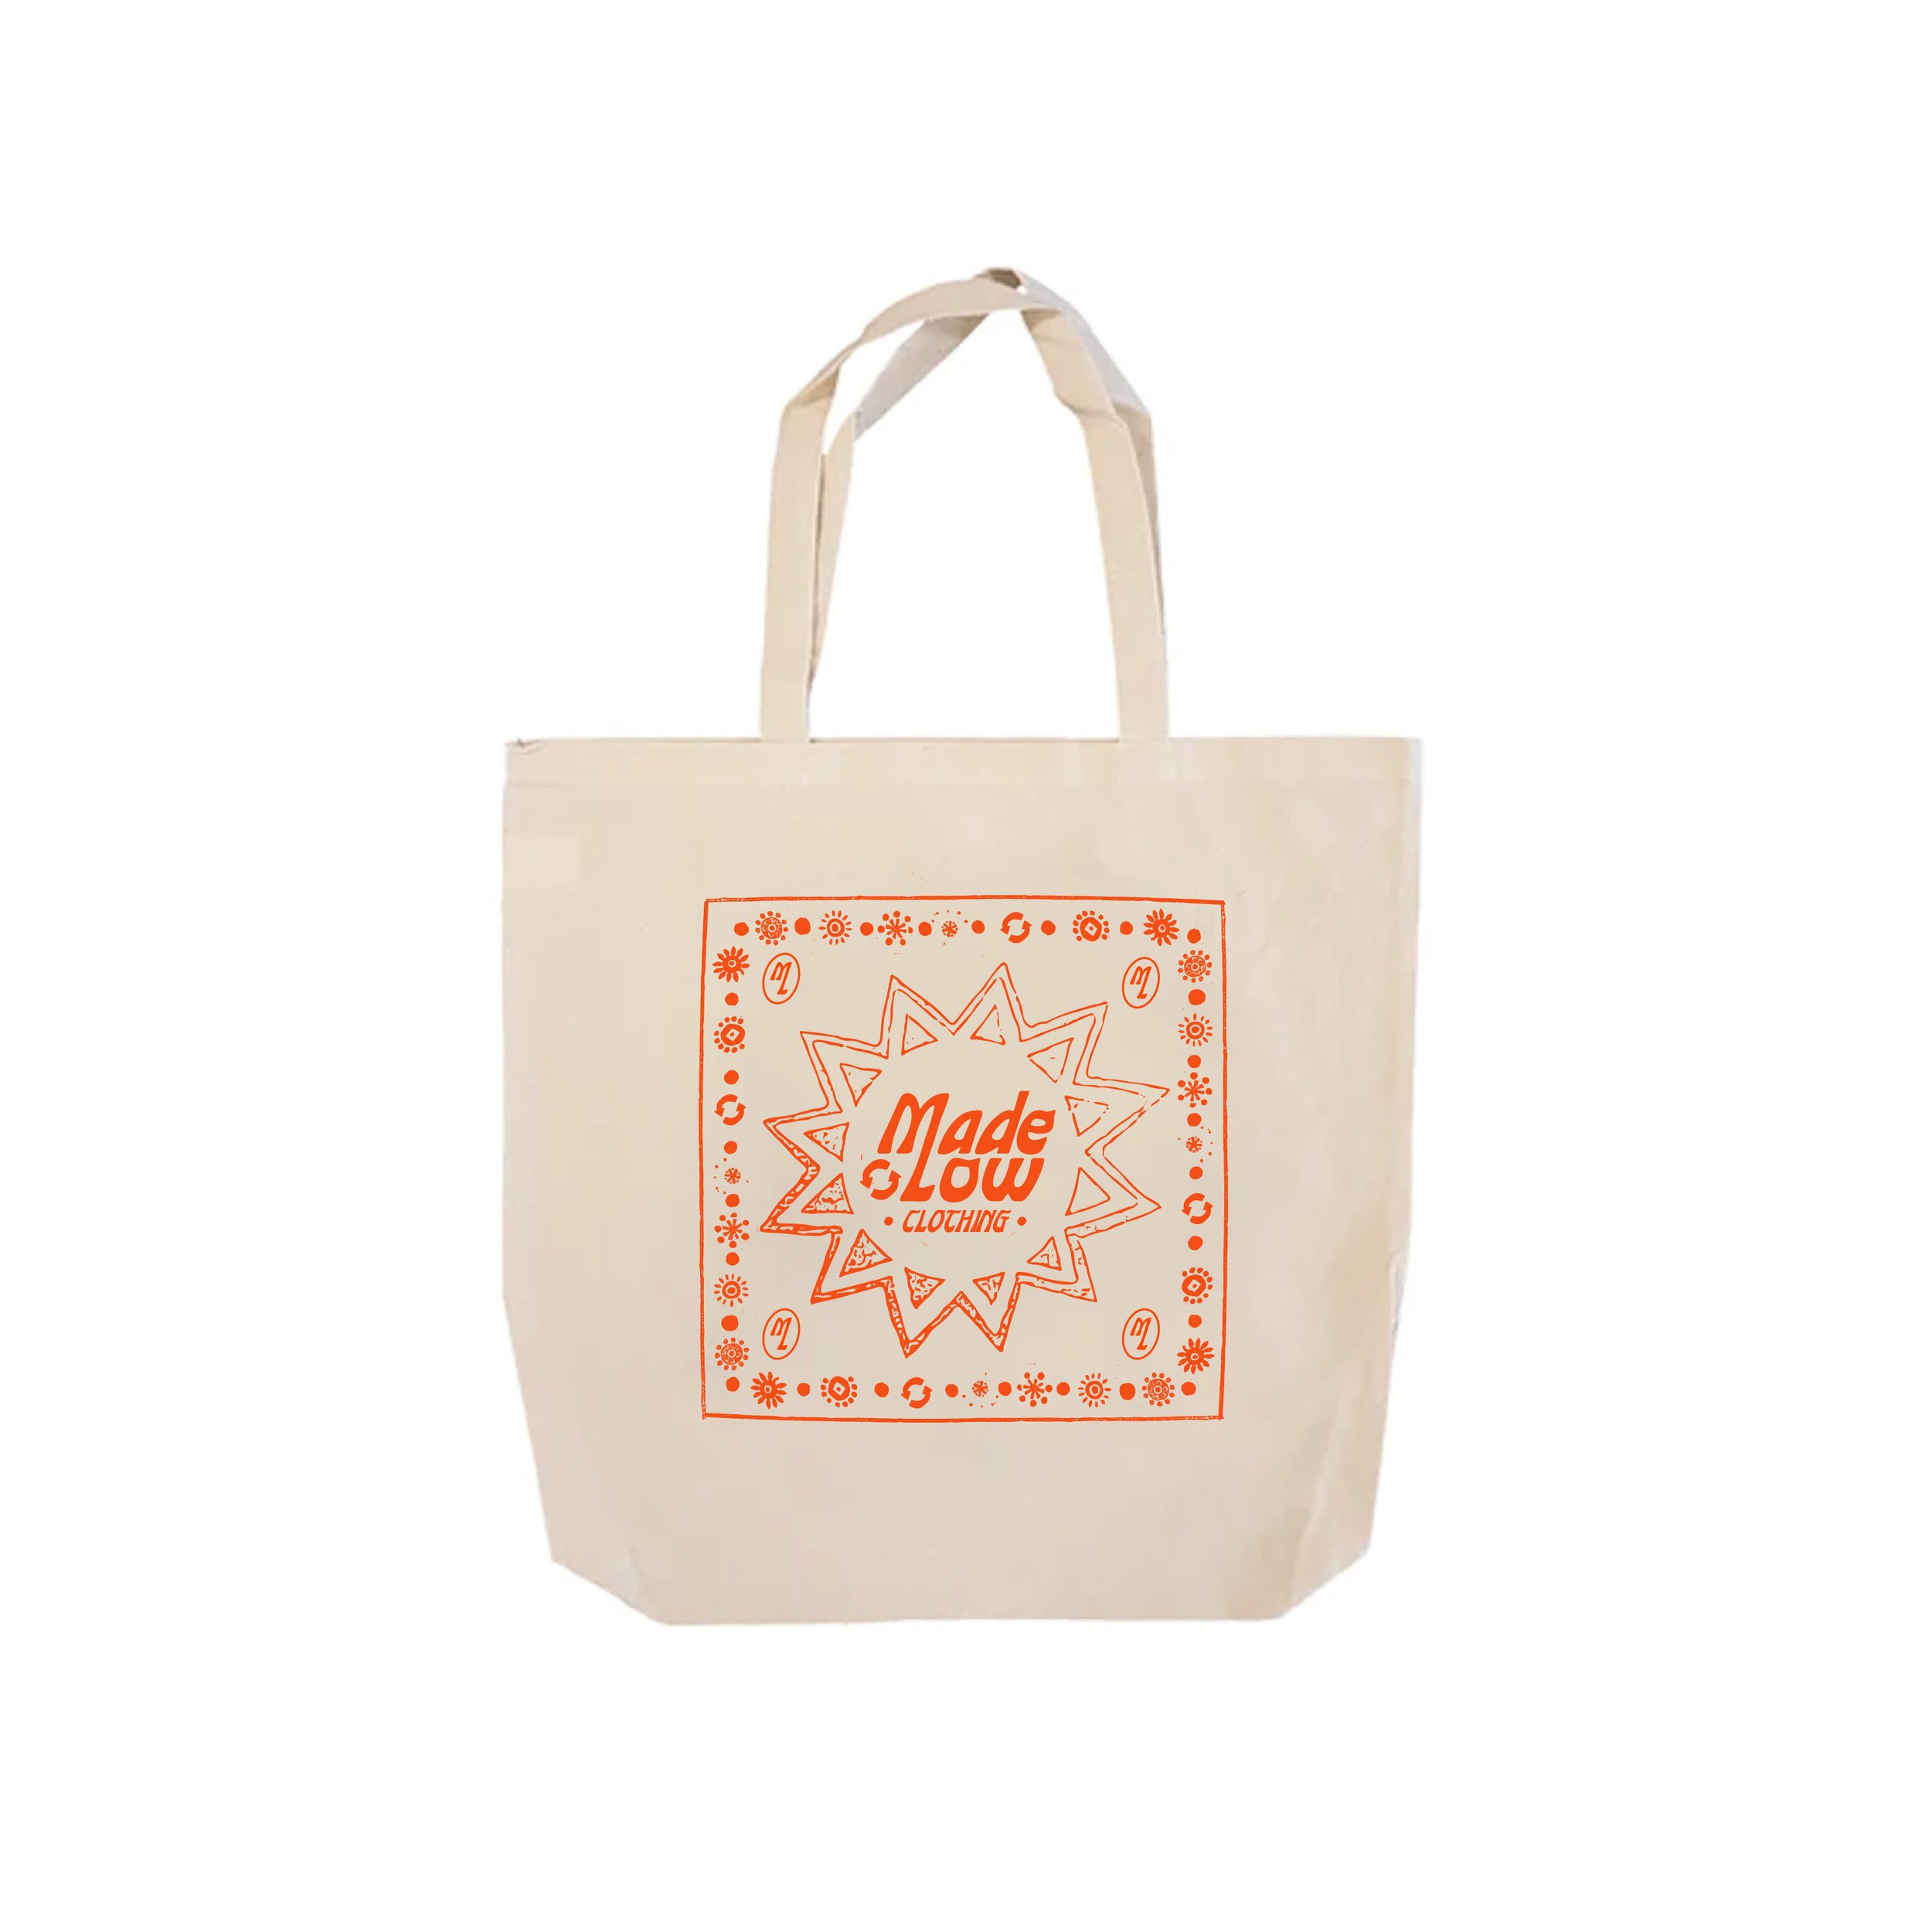 Made Low Clothing Tote-01.jpg